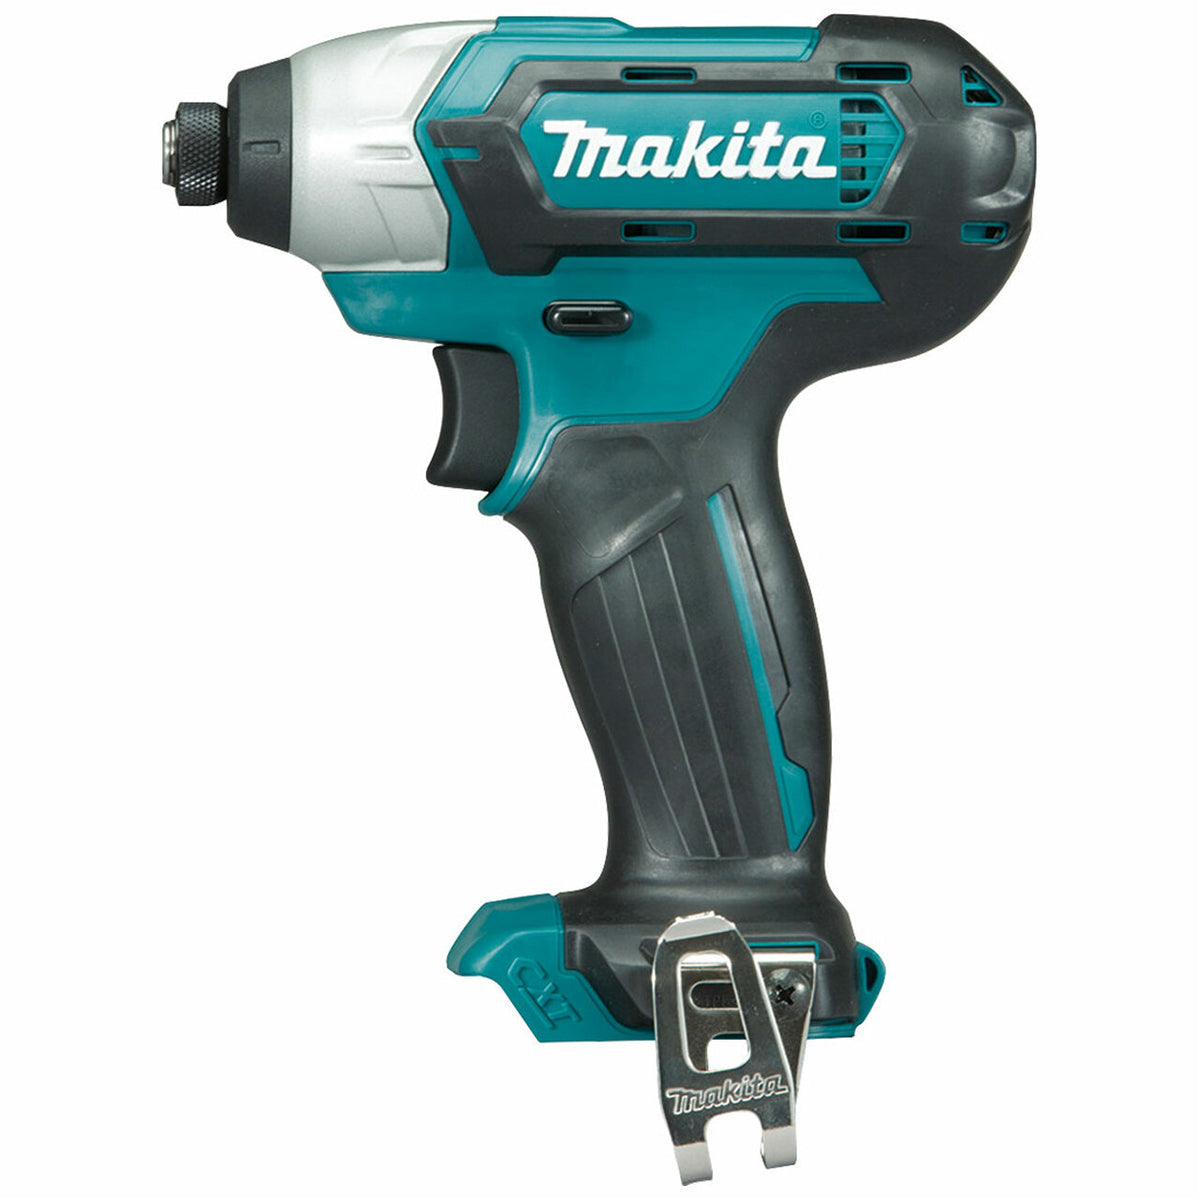 Makita CLX224AJ 12V Max CXT 2 Piece Cordless Kit With 2 x 2.0Ah Batteries & Charger In Case